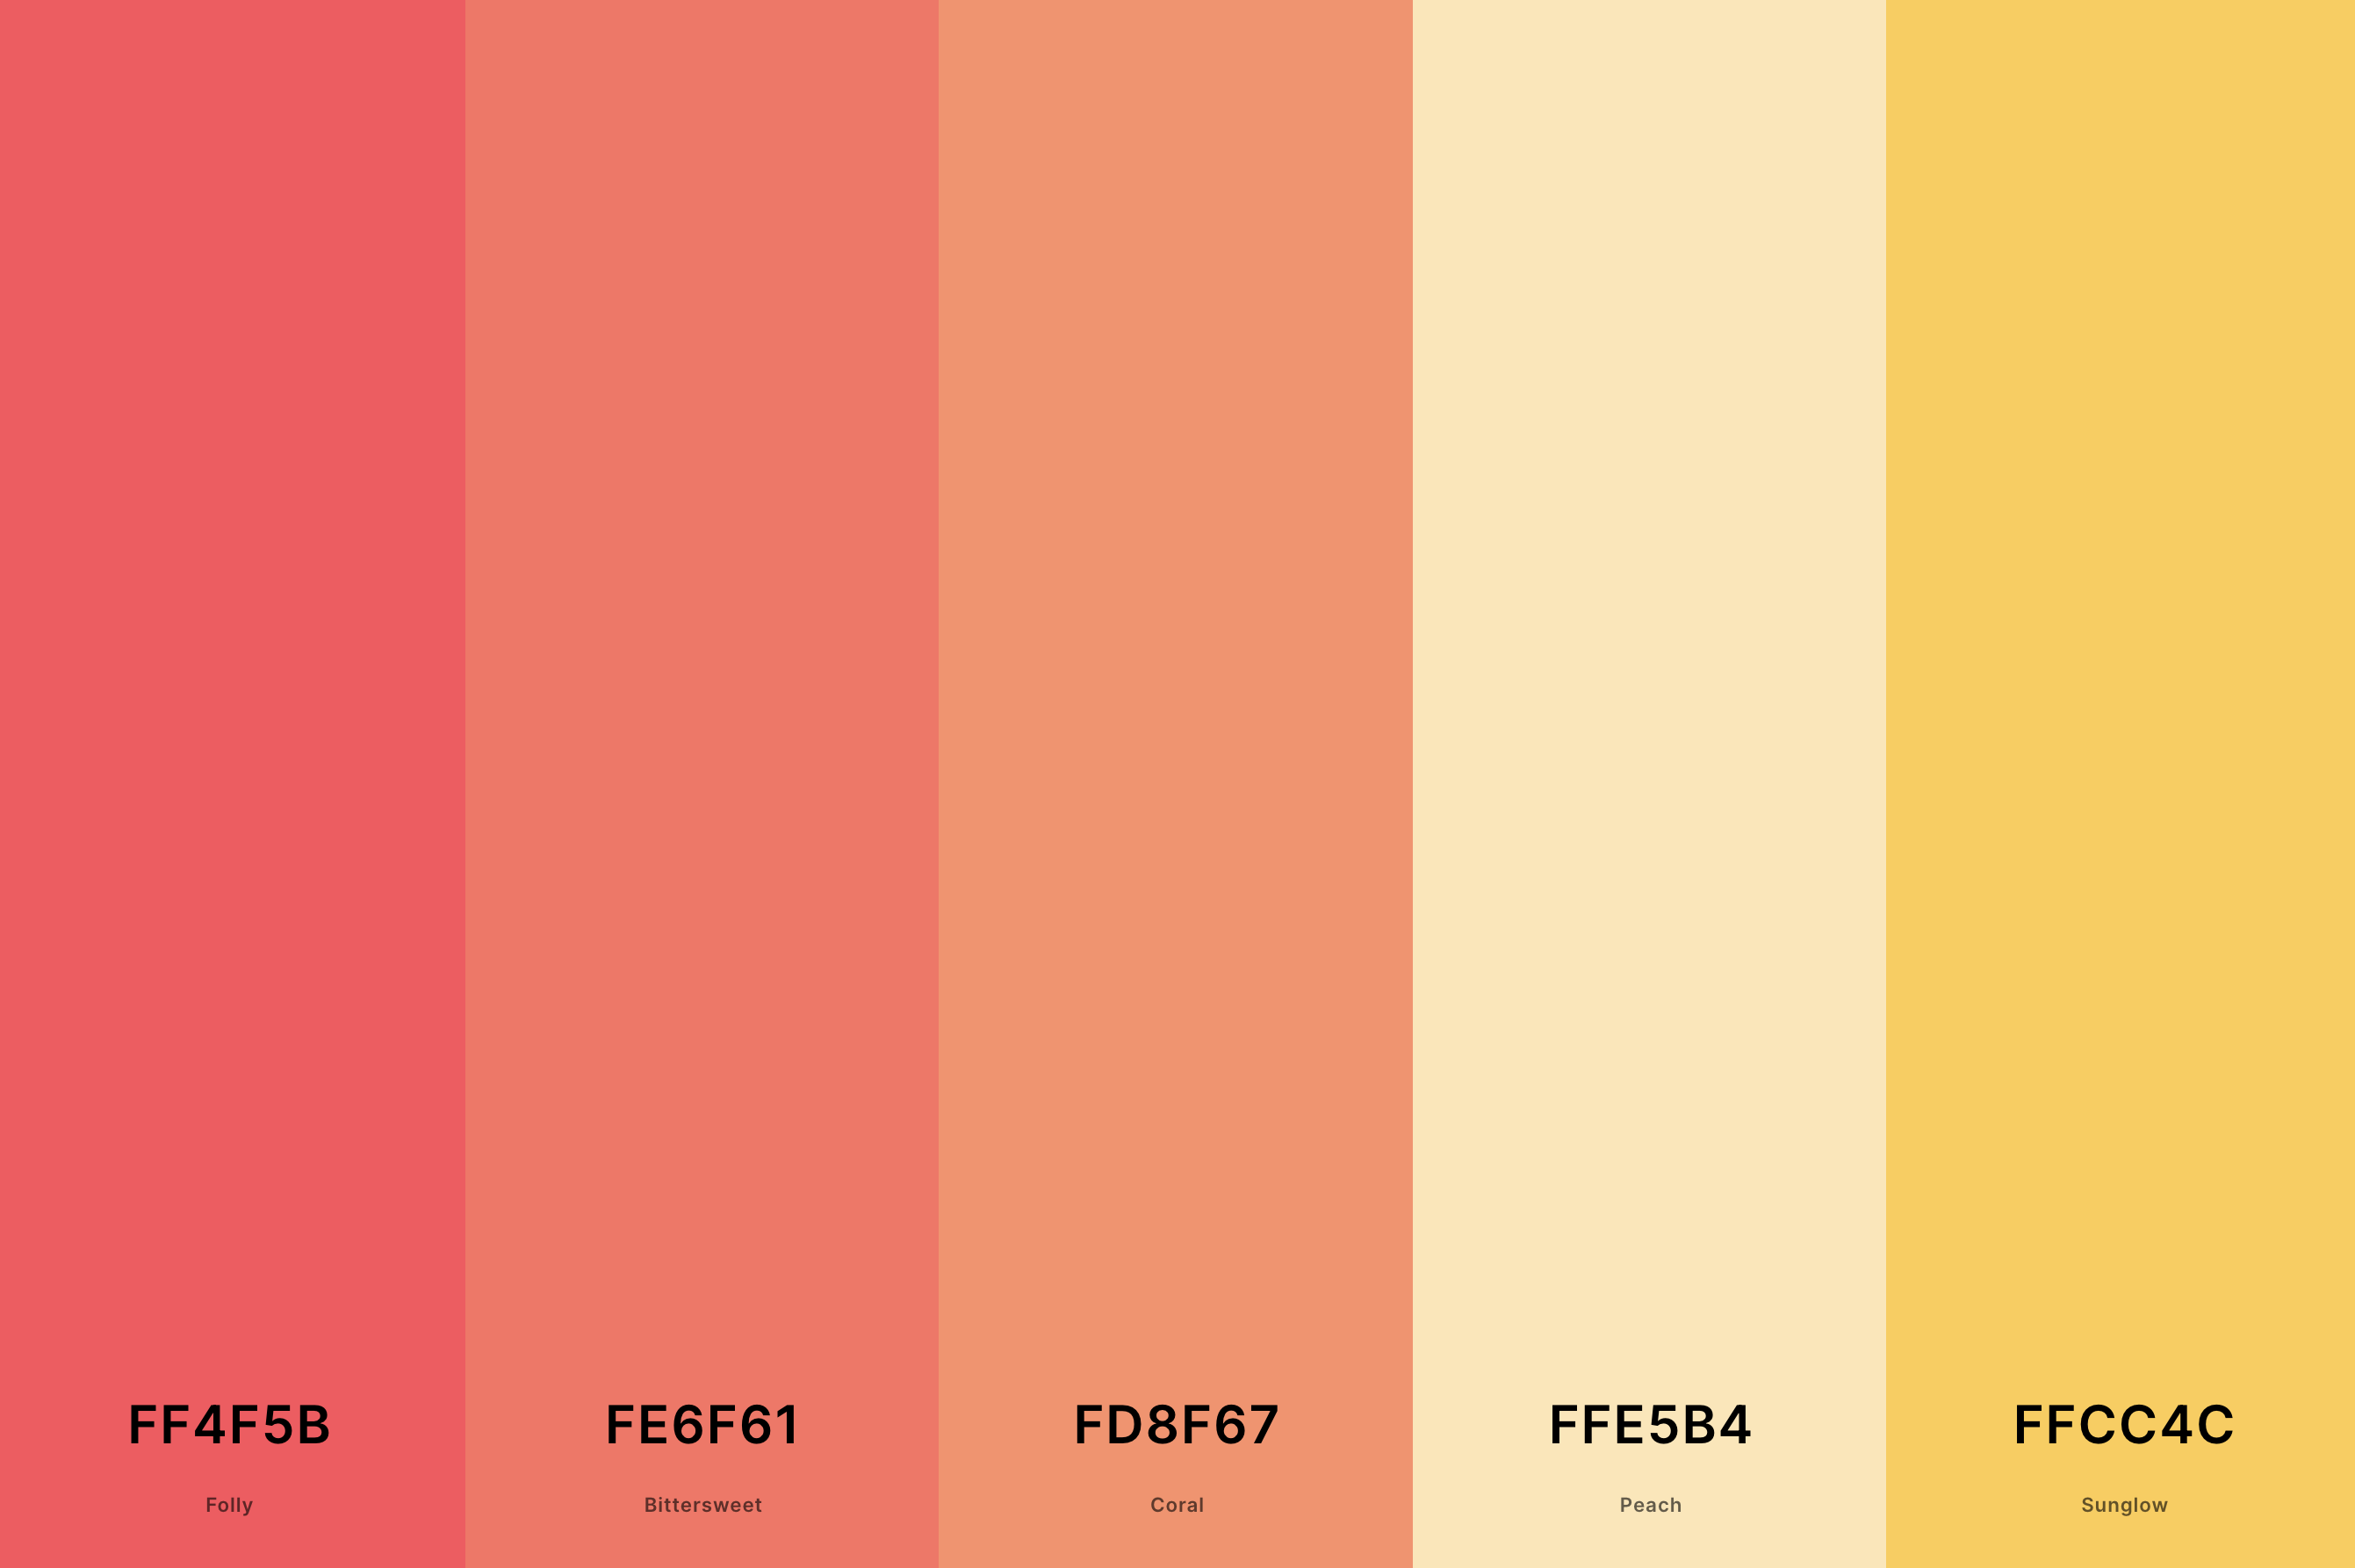 14. Coral And Peach Color Palette Color Palette with Folly (Hex #FF4F5B) + Bittersweet (Hex #FE6F61) + Coral (Hex #FD8F67) + Peach (Hex #FFE5B4) + Sunglow (Hex #FFCC4C) Color Palette with Hex Codes